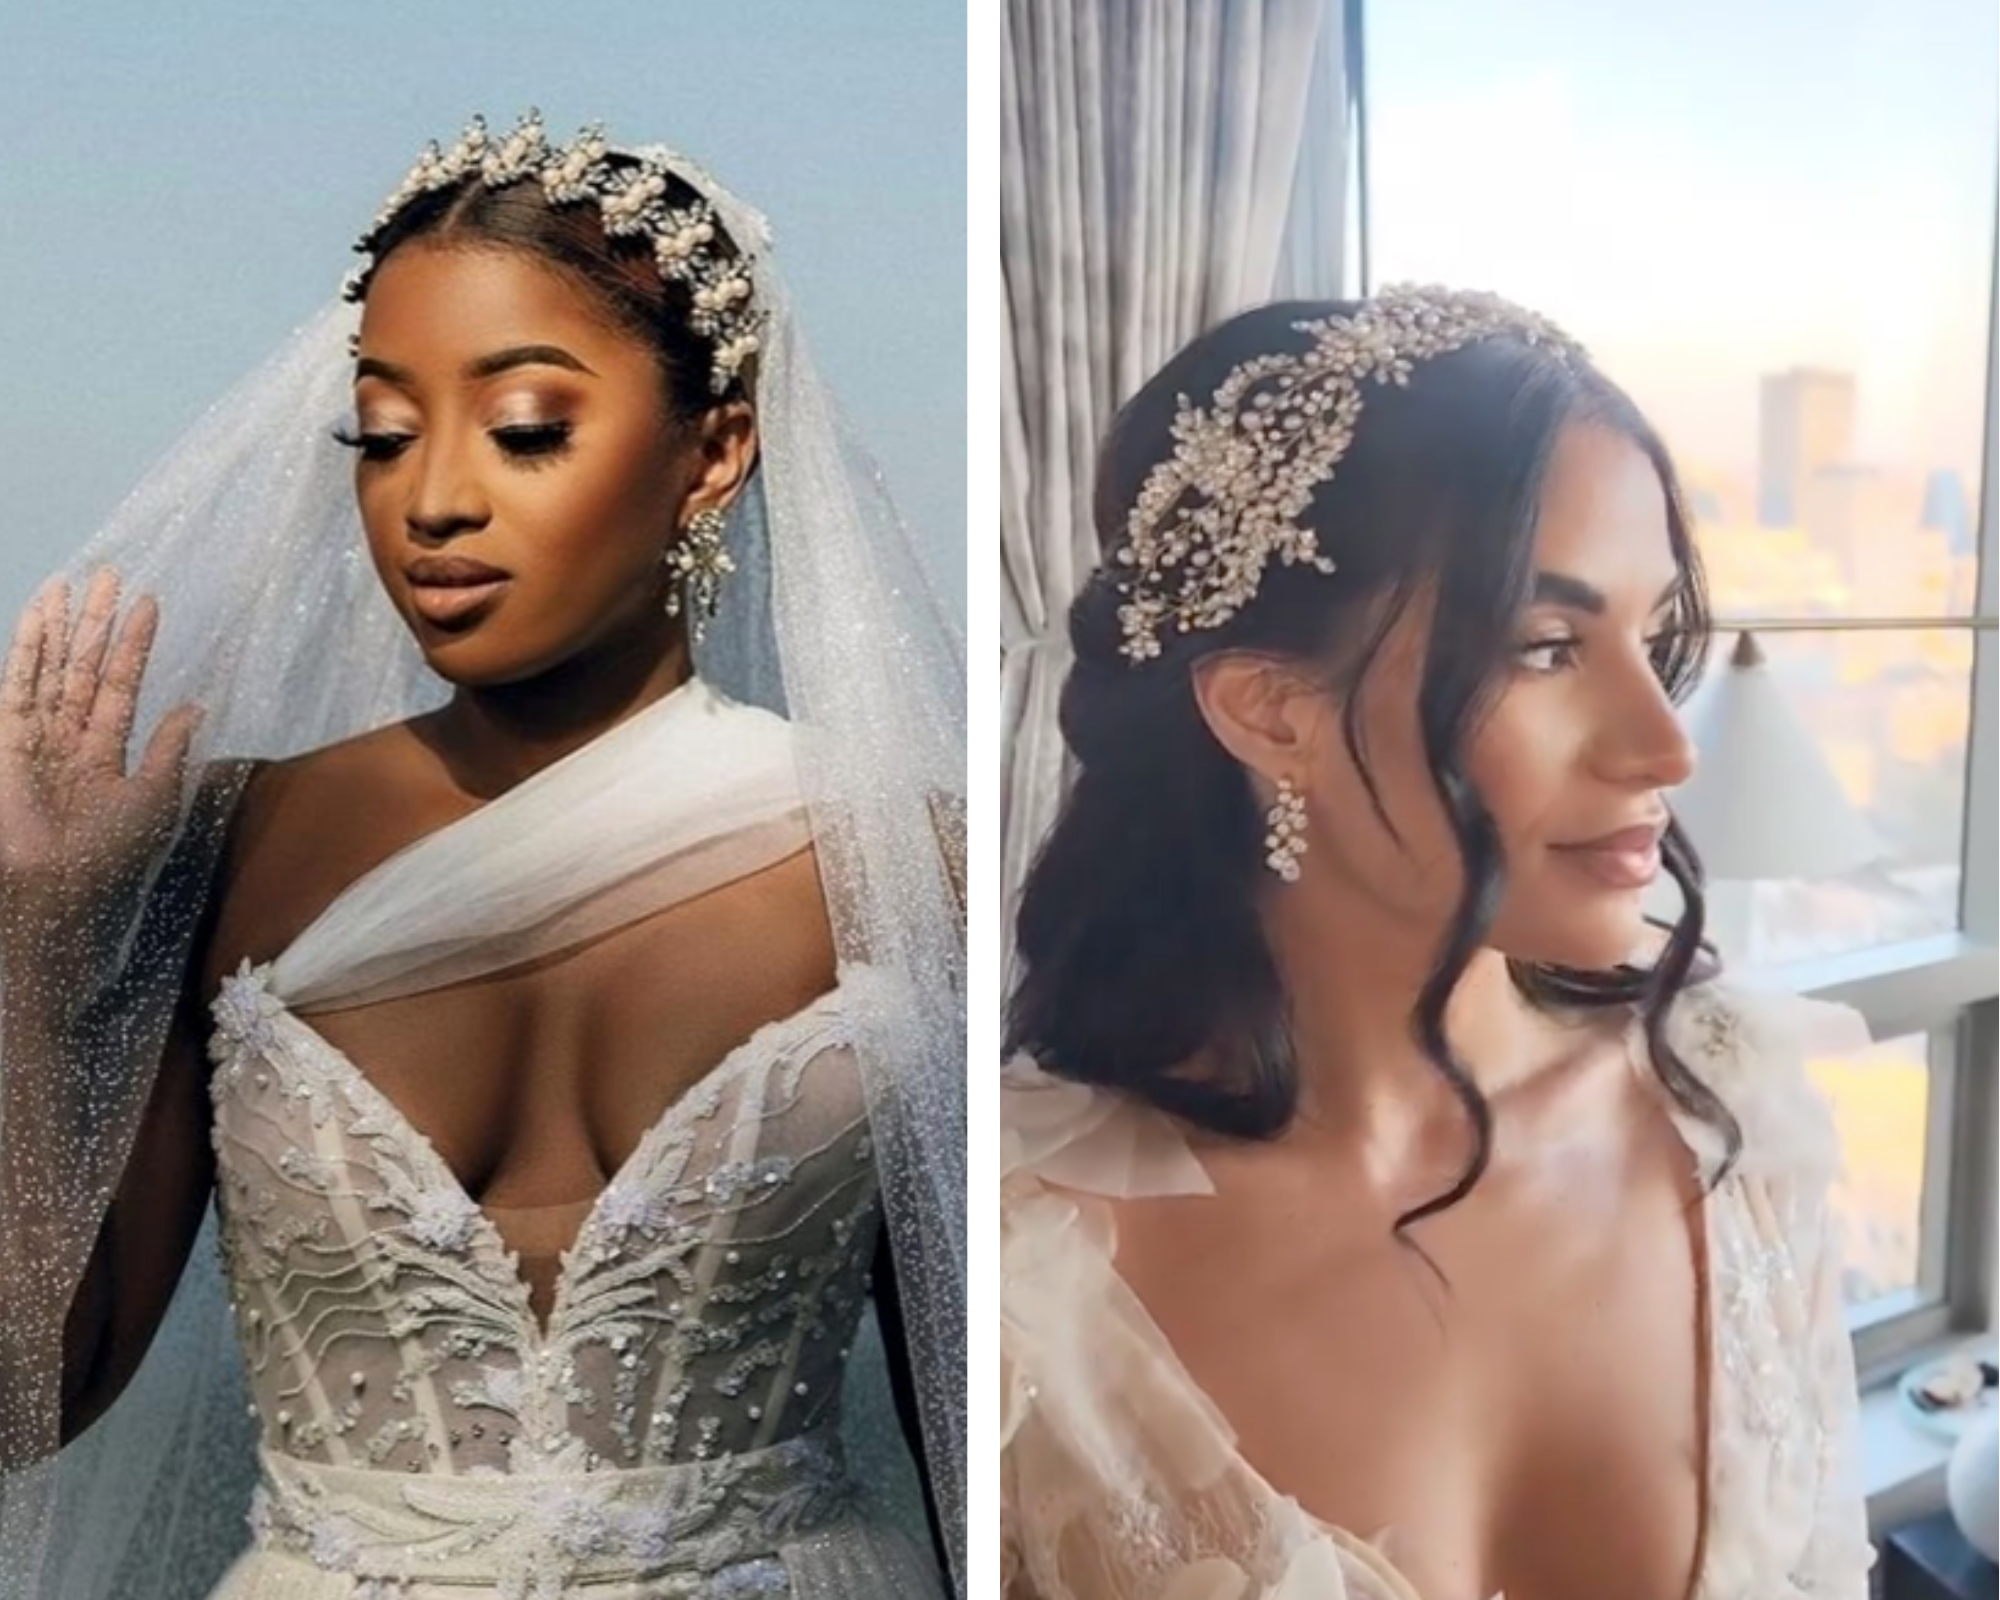 Two separate images of brides wearing pearl and crystal wedding headpiece with pearl bridal dangly earrings